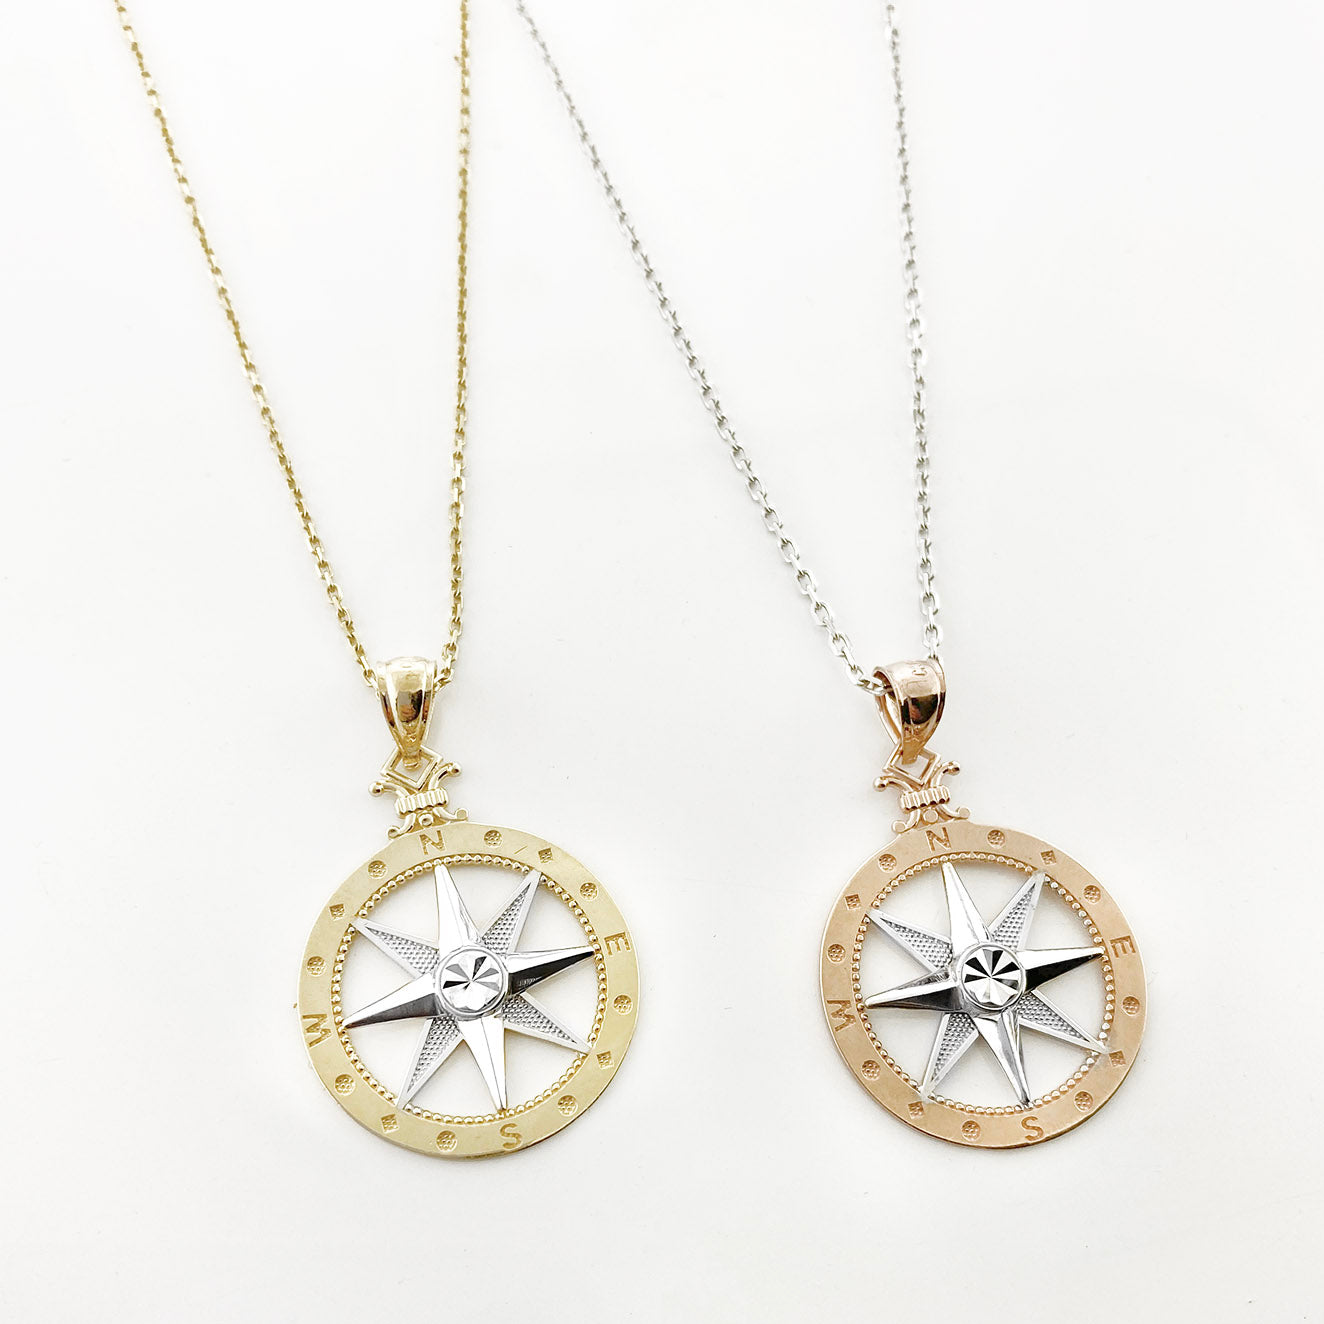 Rose Gold Compass Necklace with Aqua Crystals — Ocean Jewelry